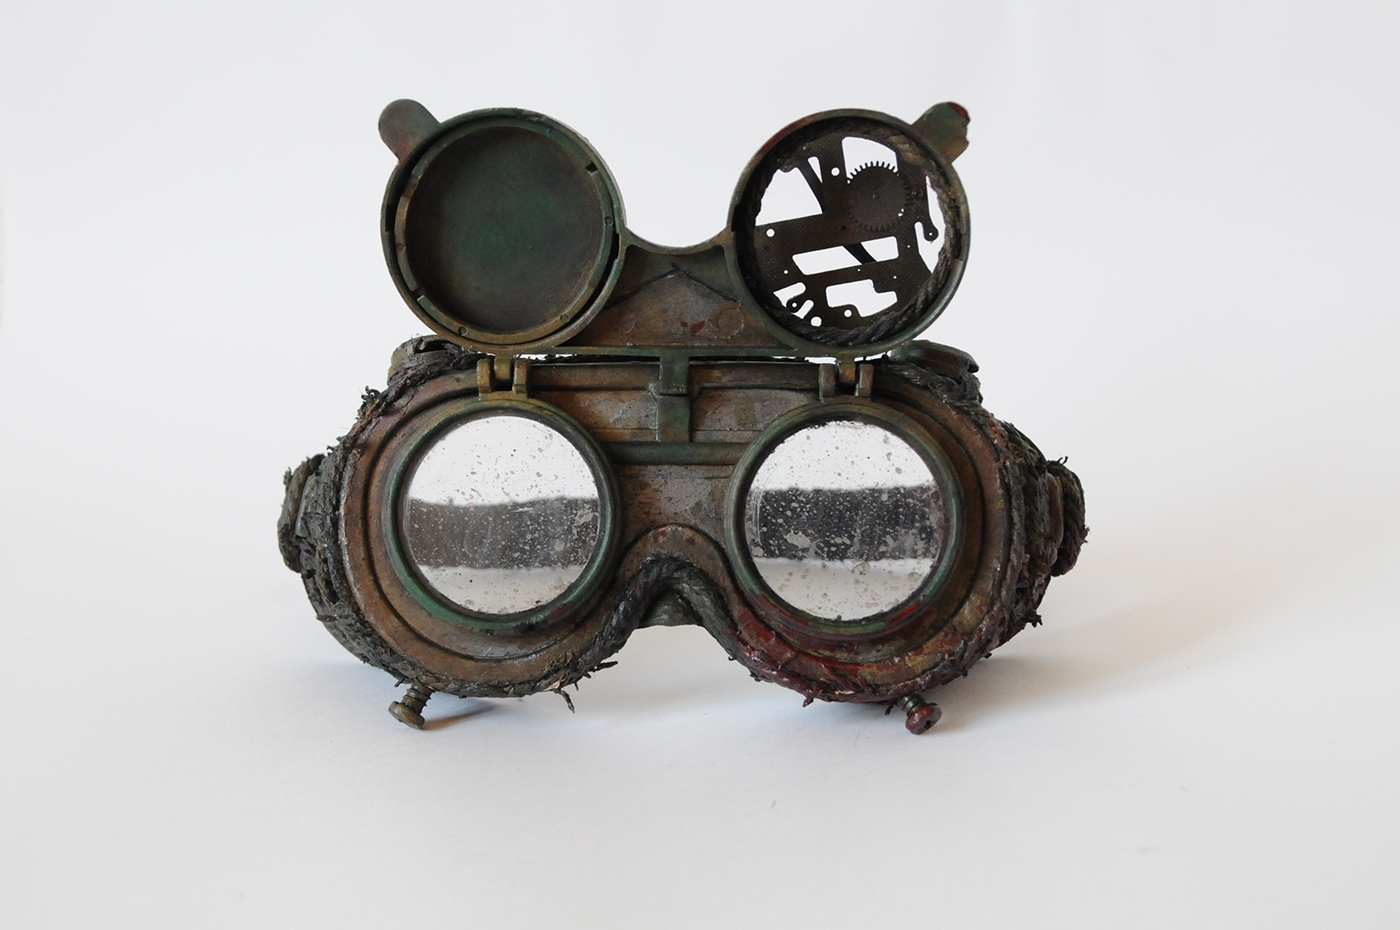 #postapocalyptic #glasses #madmax #furyroad #film  #accessory